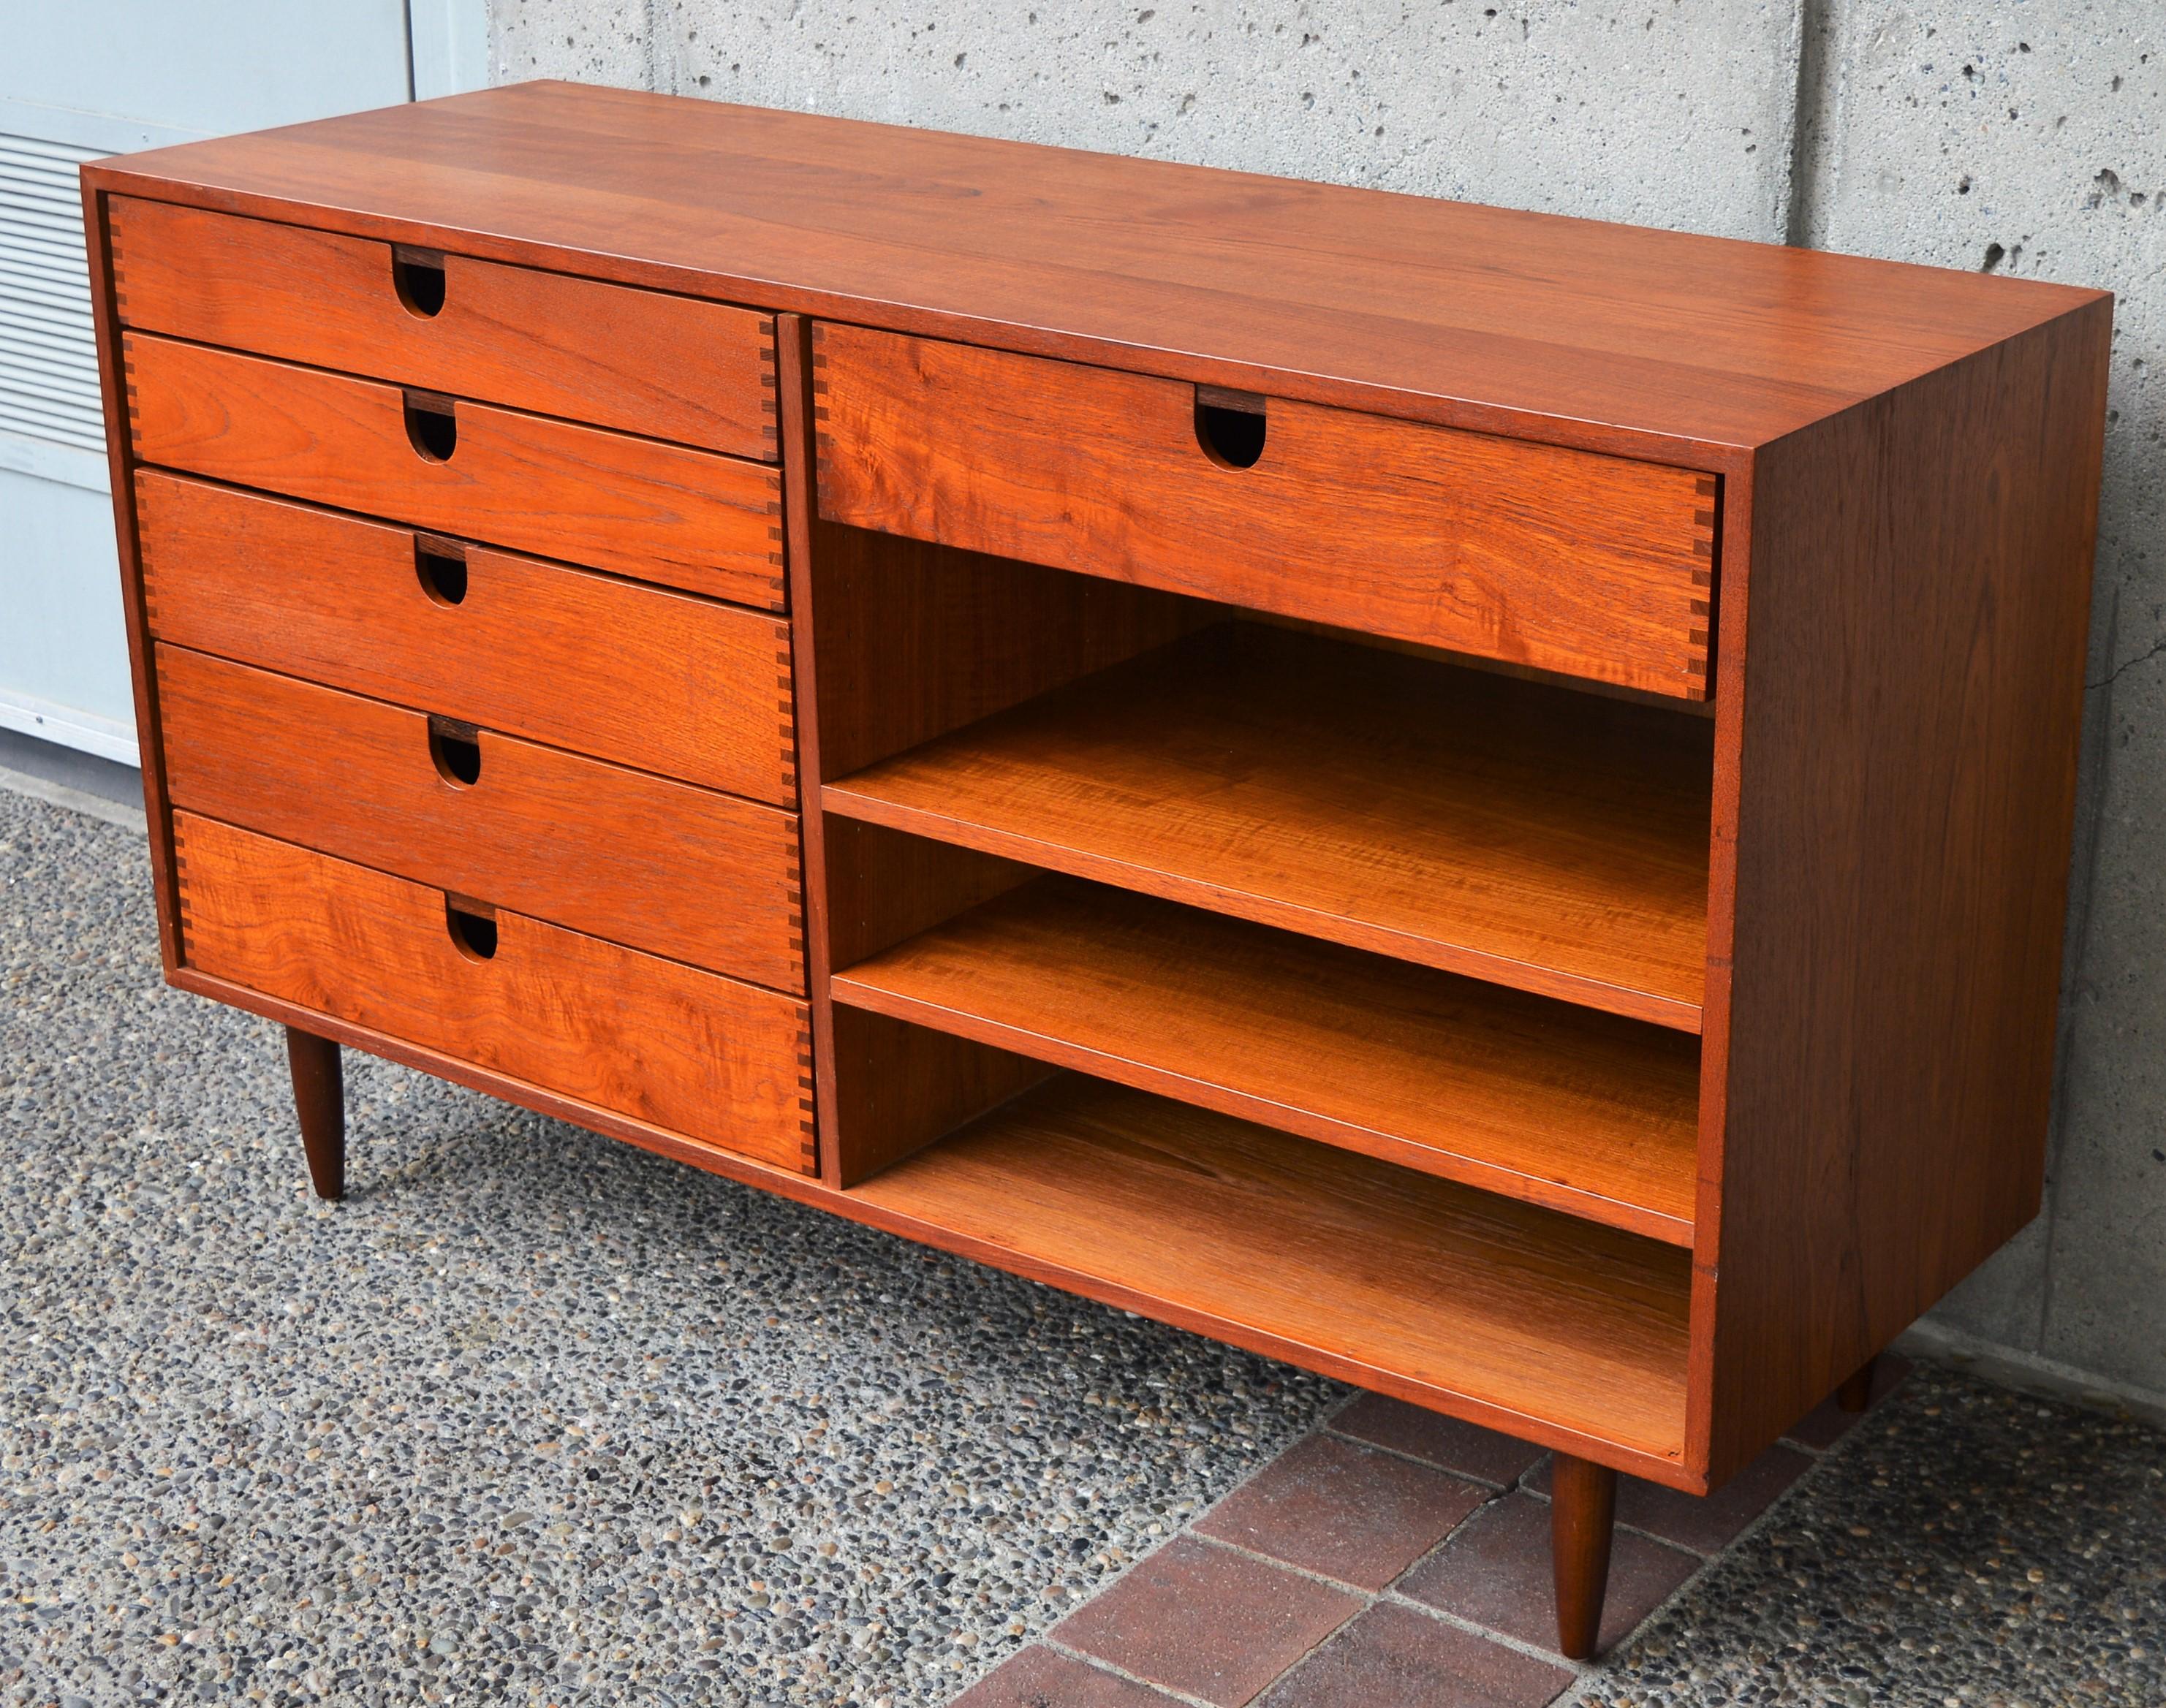 This super unique Danish modern teak credenza was designed by Kai Kristiansen for Feldballes Mobelfabrik. All of the drawers and shelves can be adjusted and moved where ever they suit or as your needs change as the drawer glides are removable. The